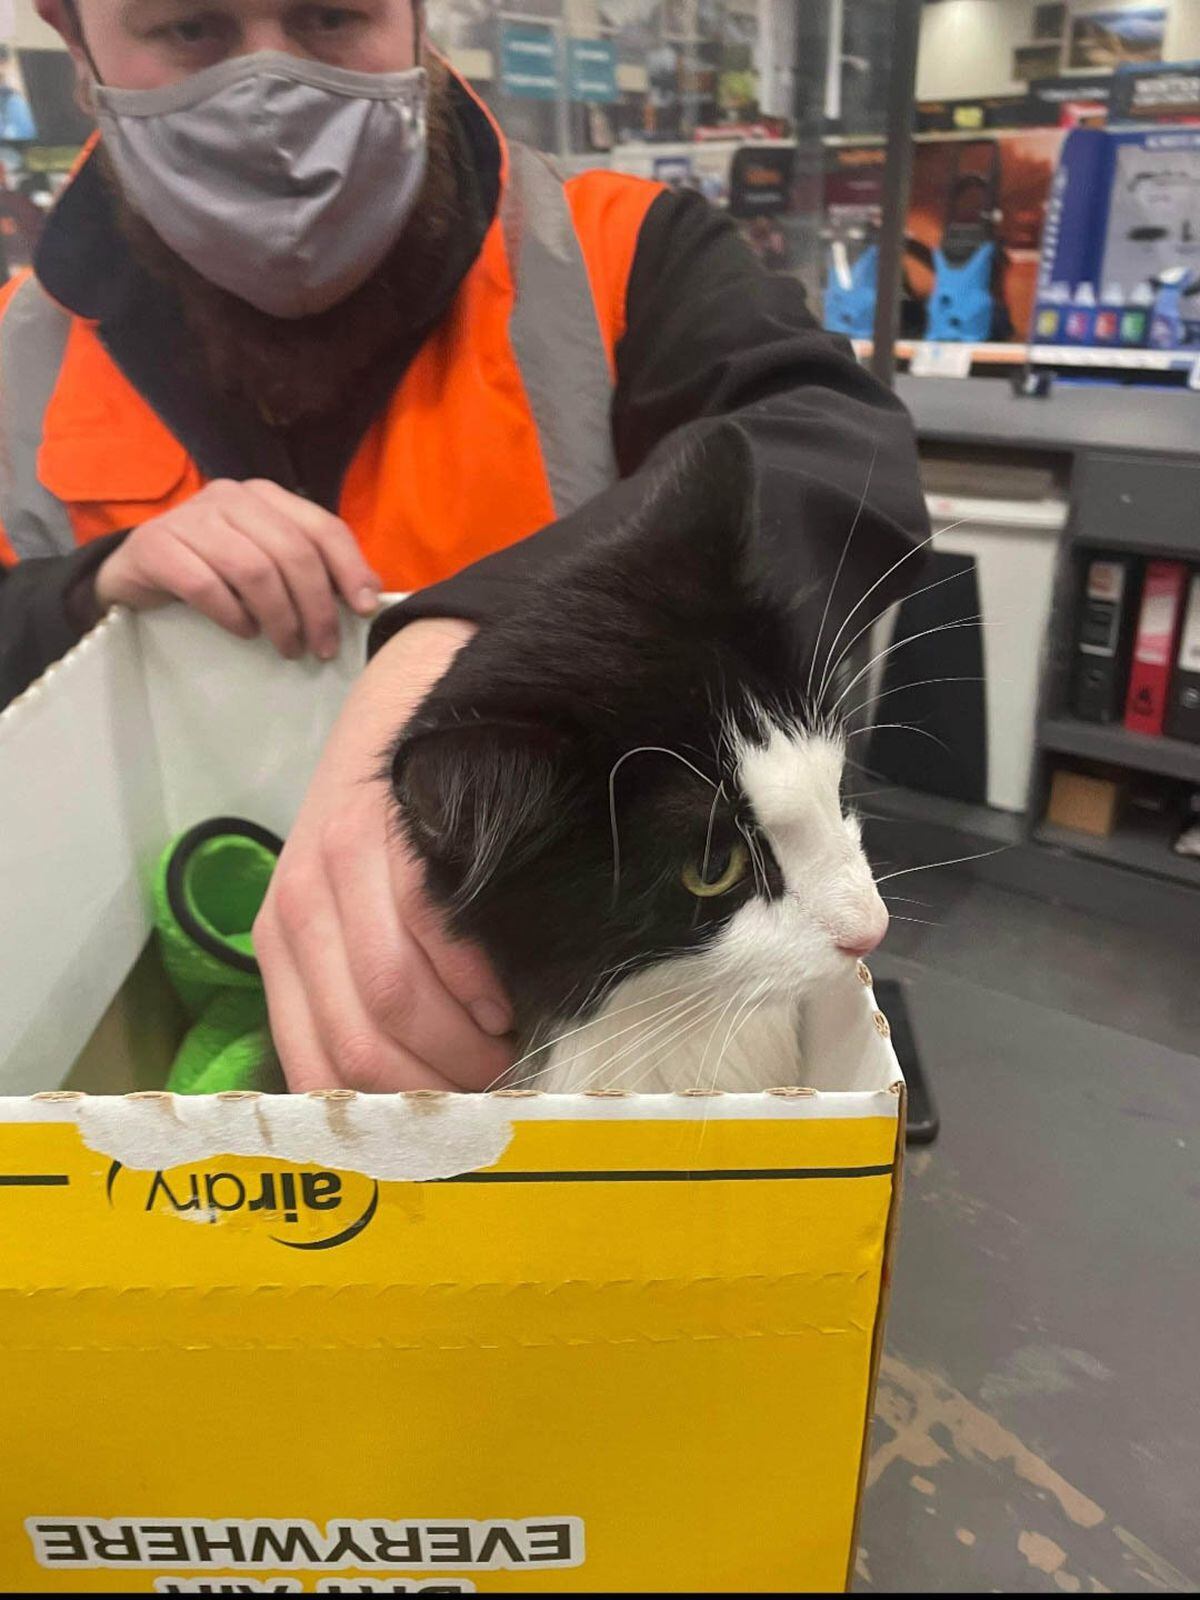 Chipper was looked after at the Halfords store in Stafford